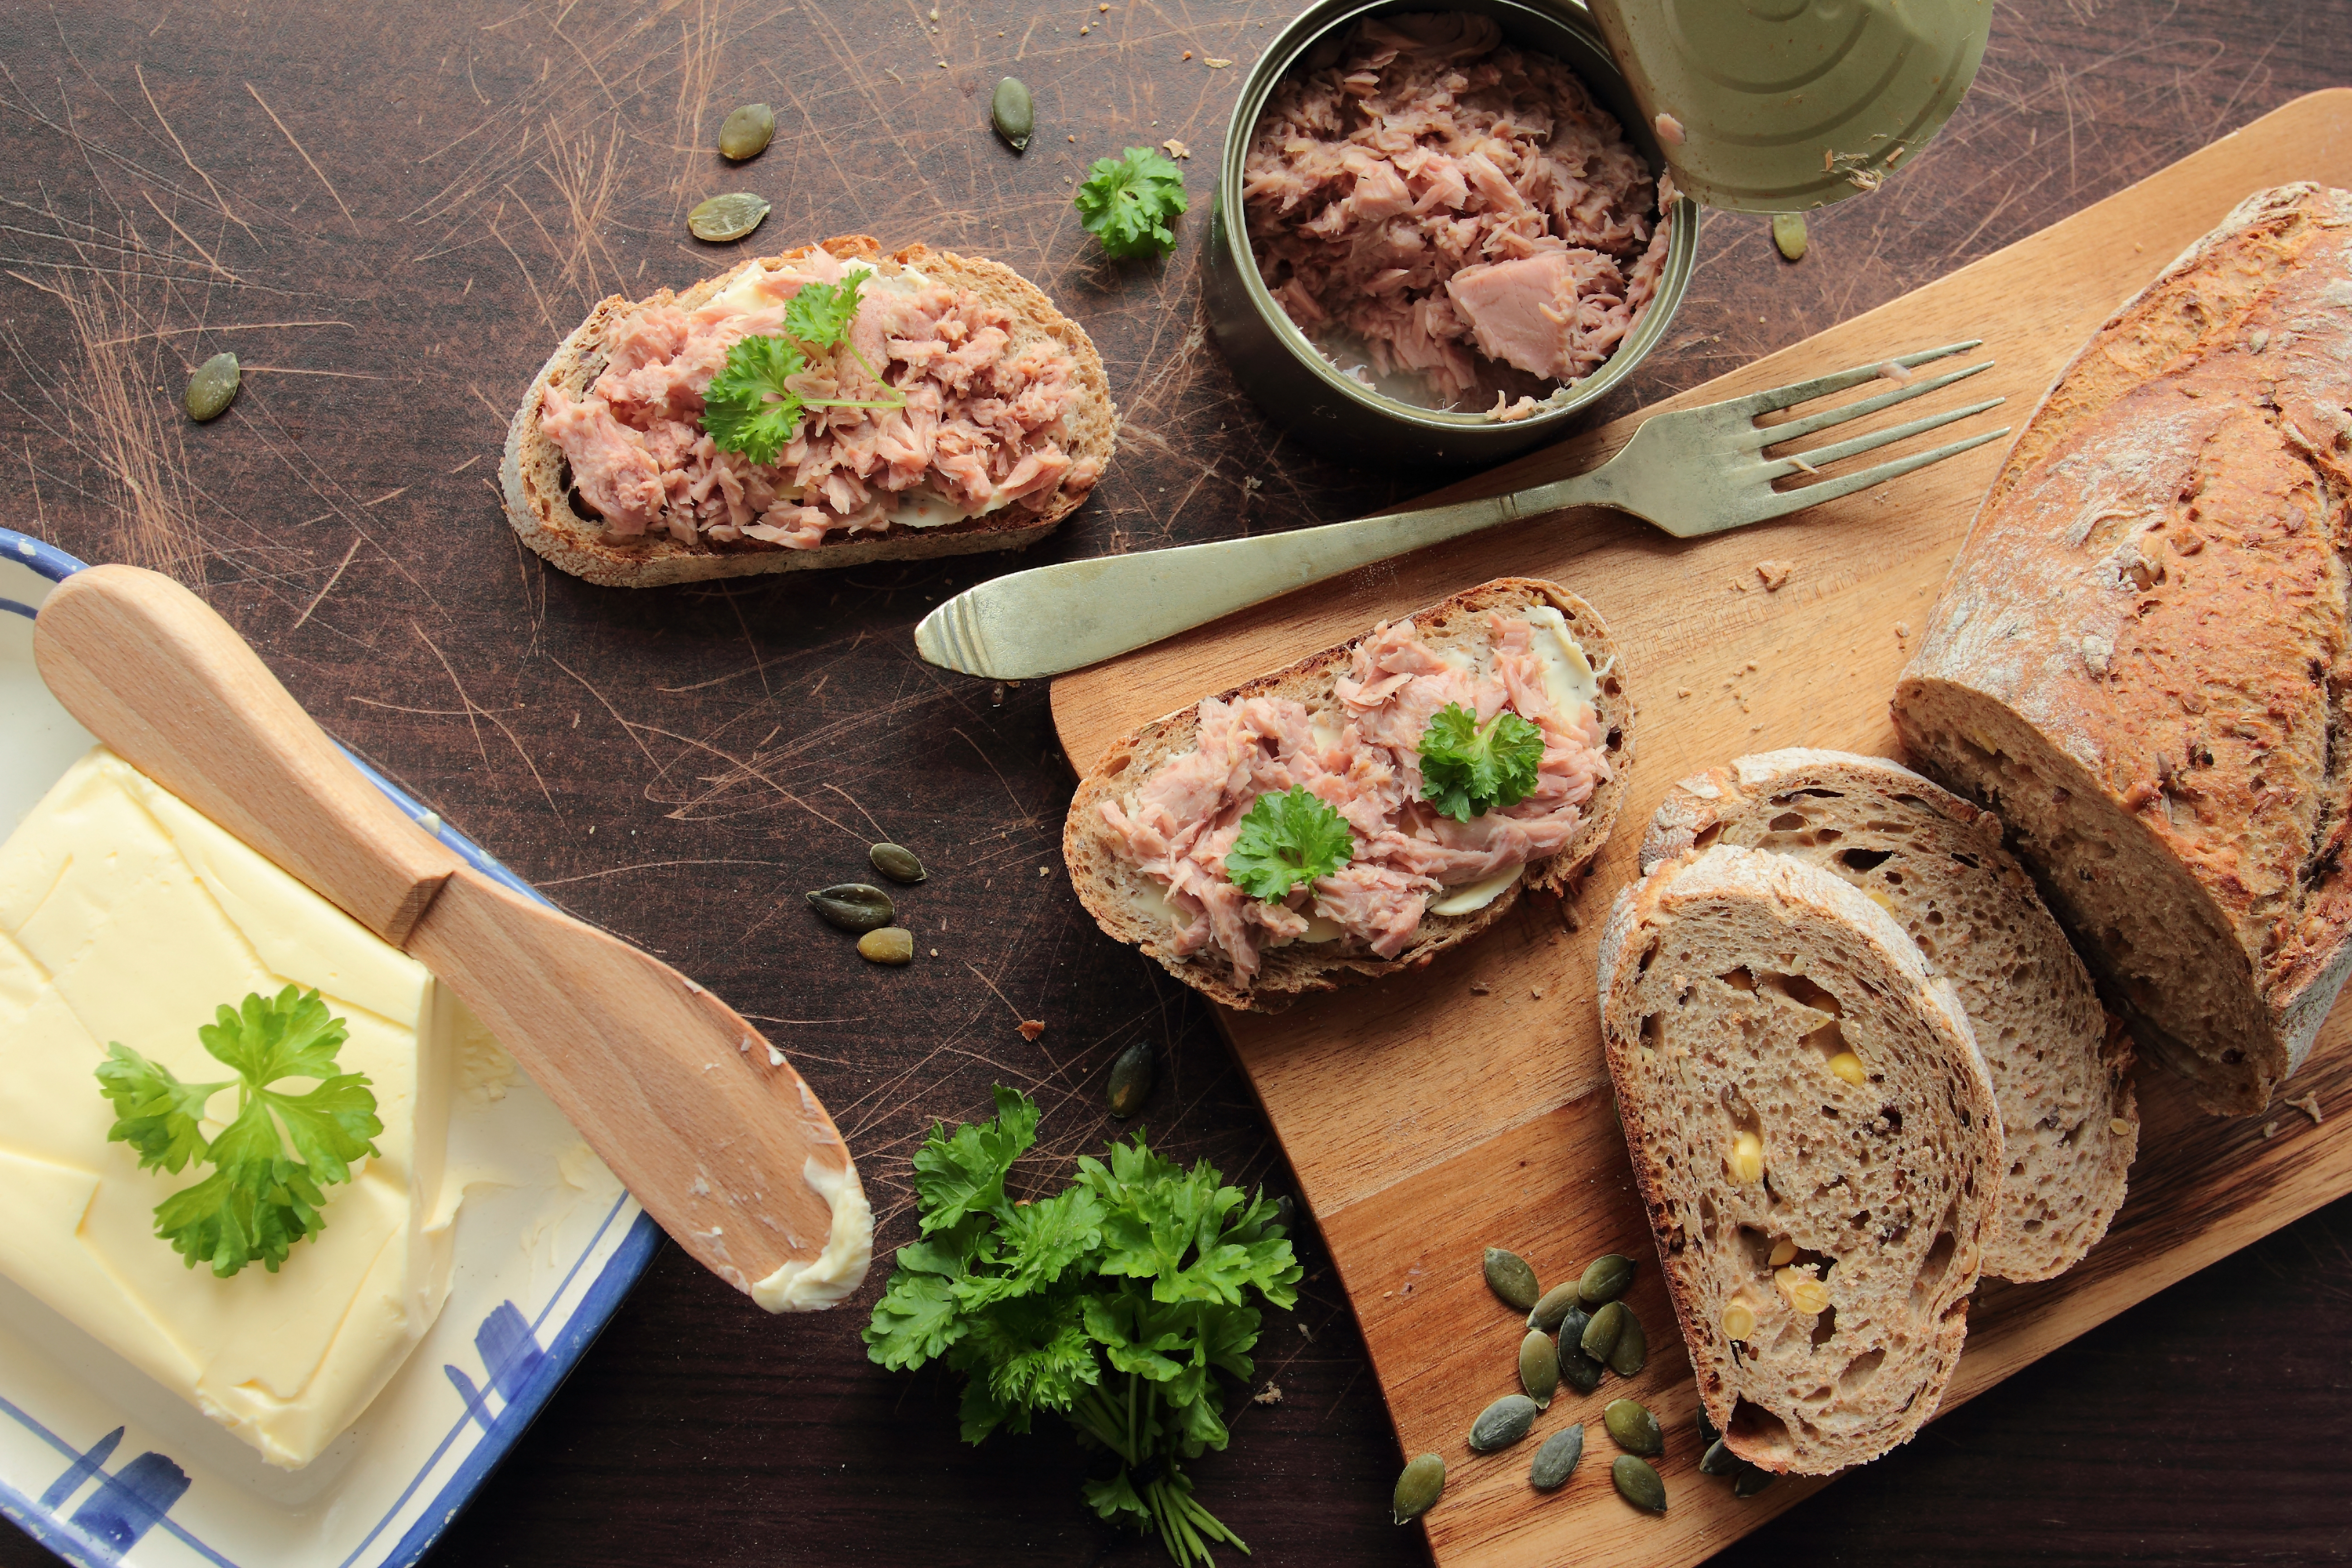 A loaf of bread cut into slices on a cutting board, an opened can of tuna, and two slices of bread topped with the tuna.